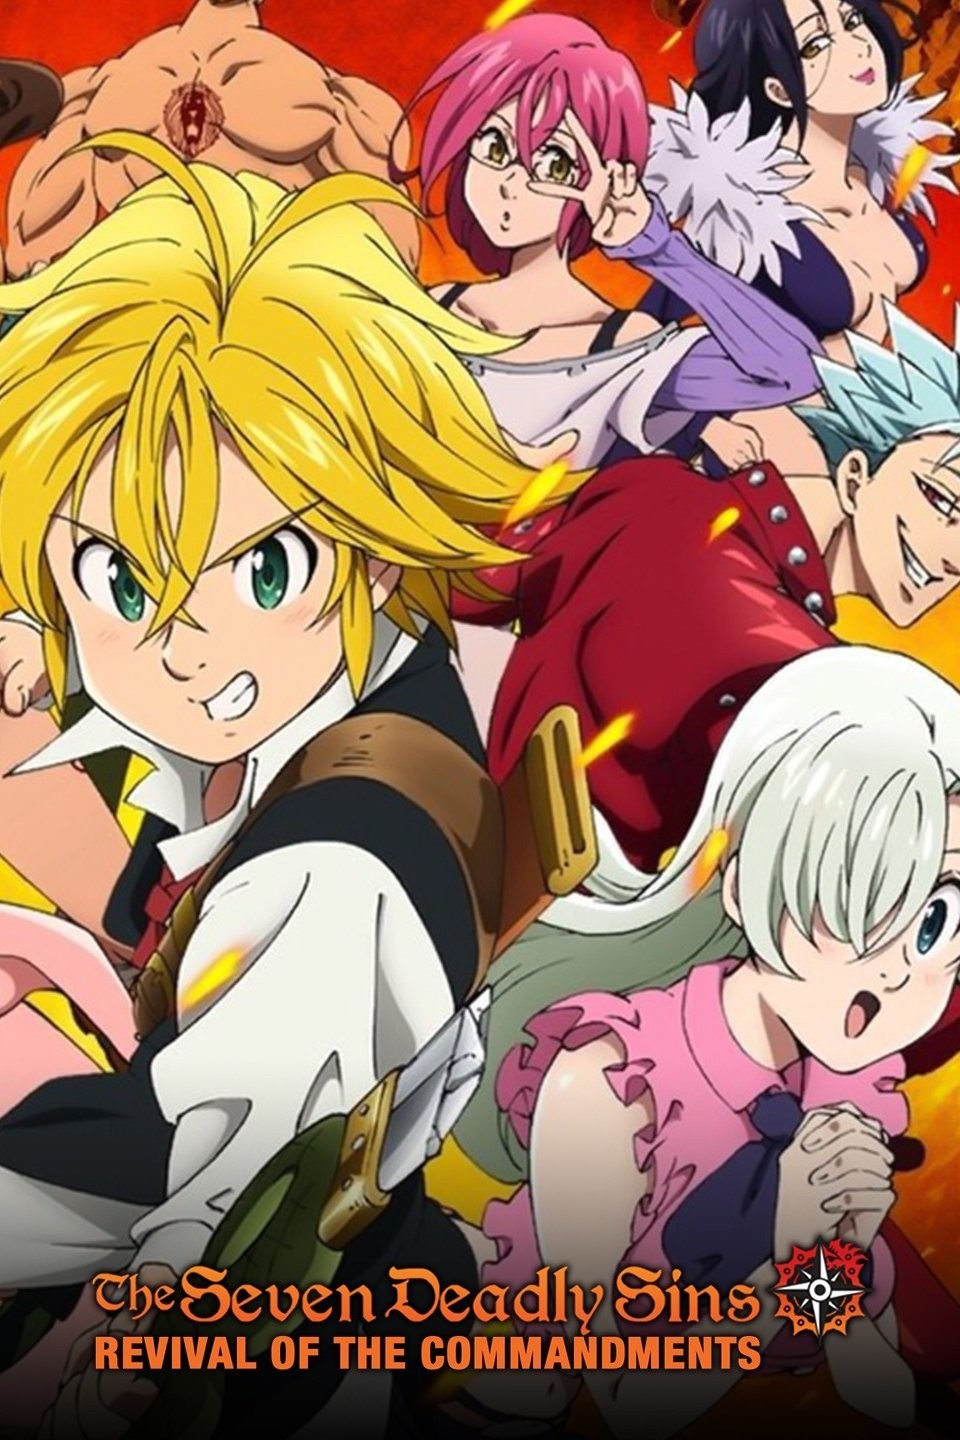 The Seven Deadly Sins: Seven-Colored Recollections (Light Novel